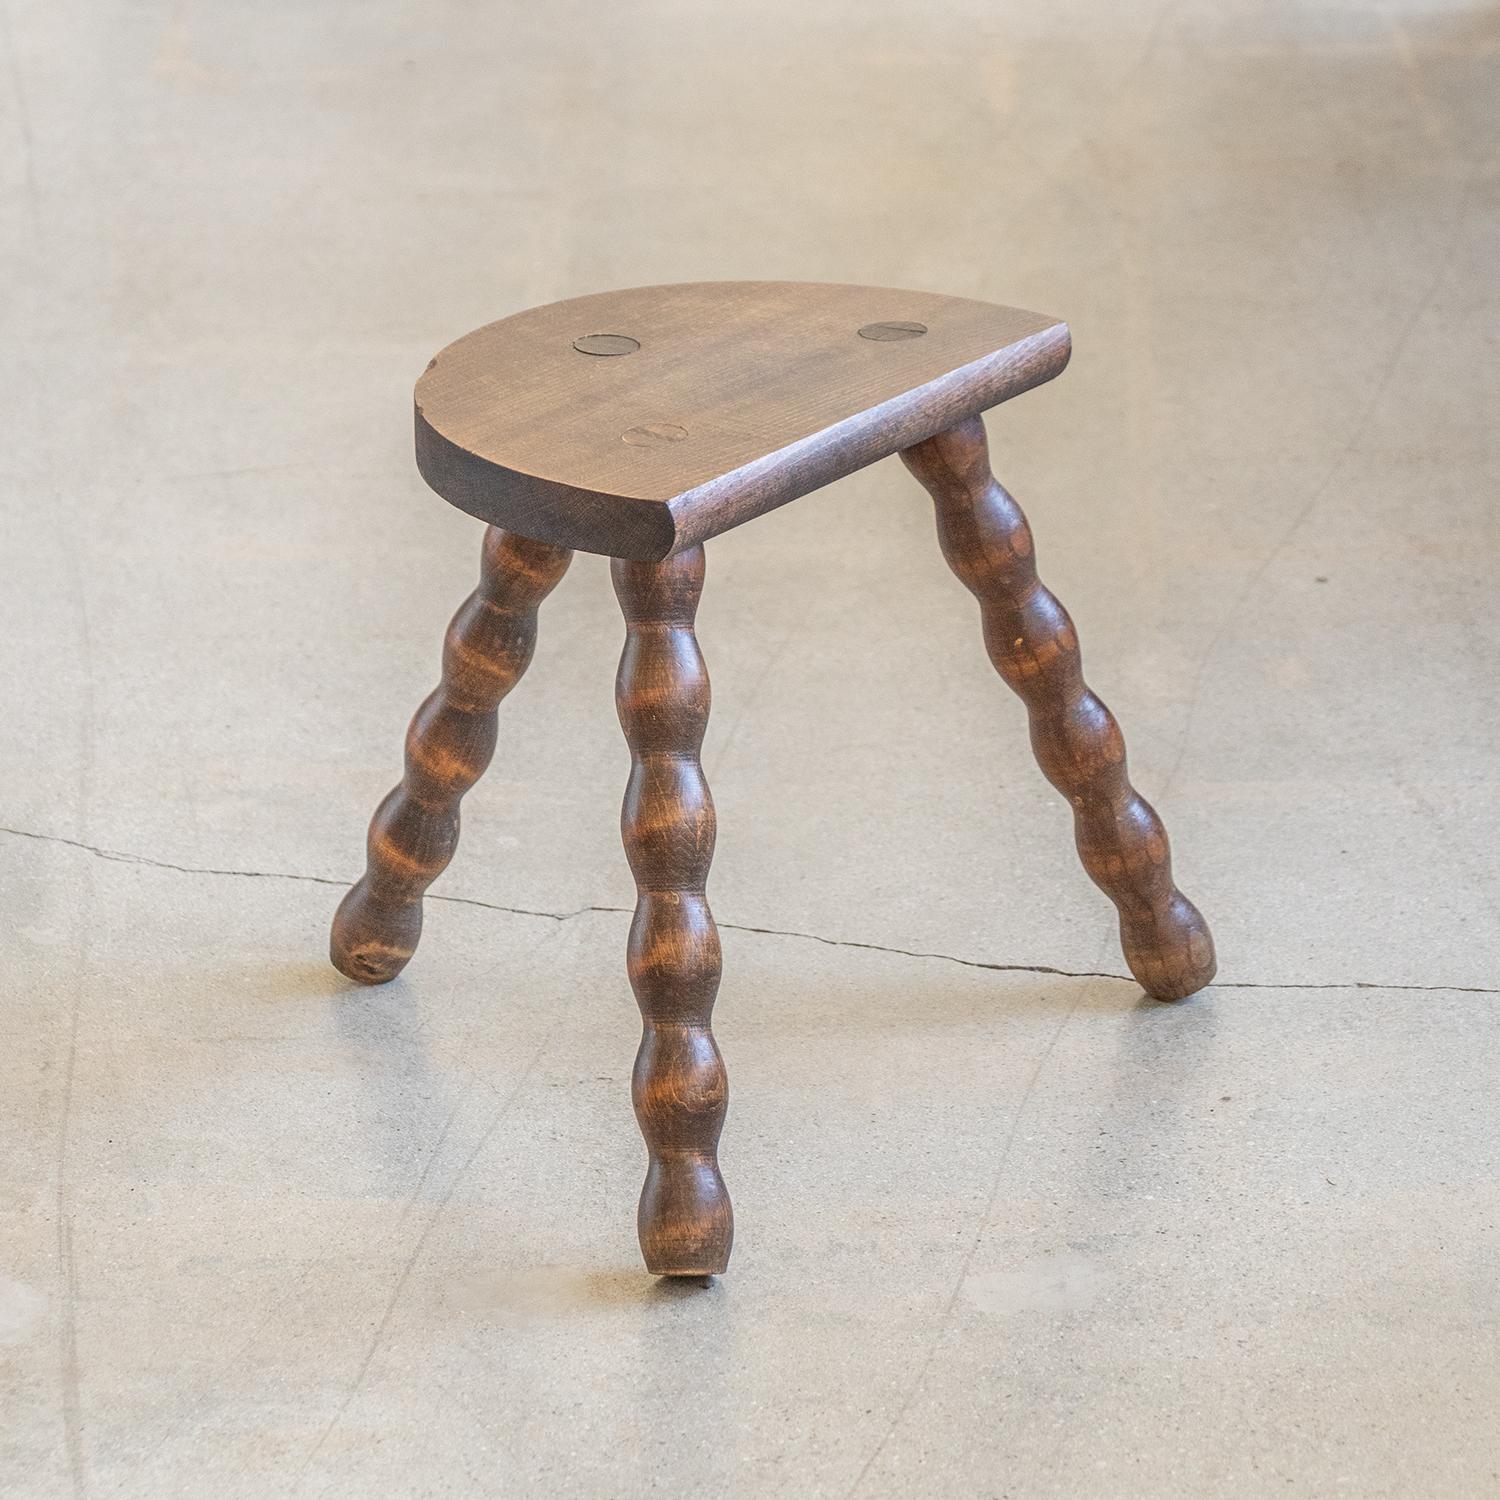 Vintage short stool with semi-circle seat and beautiful wavy legs from France. Original finish with great age markings and patina. Can be used as a stool or as side table next to chairs.